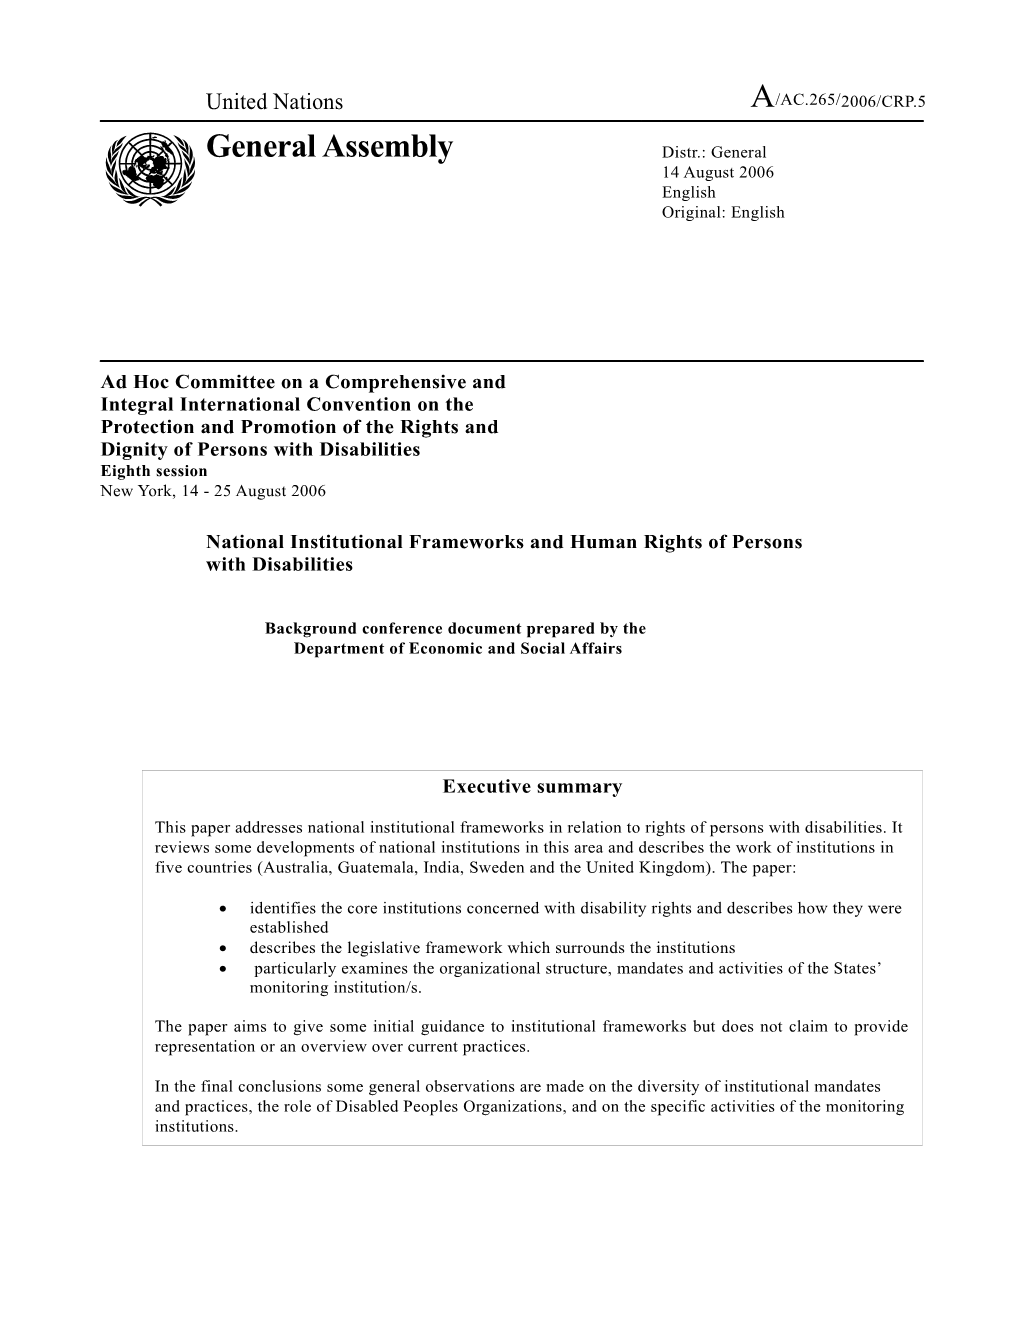 National Institutional Frameworks and Human Rights of Persons with Disabilities